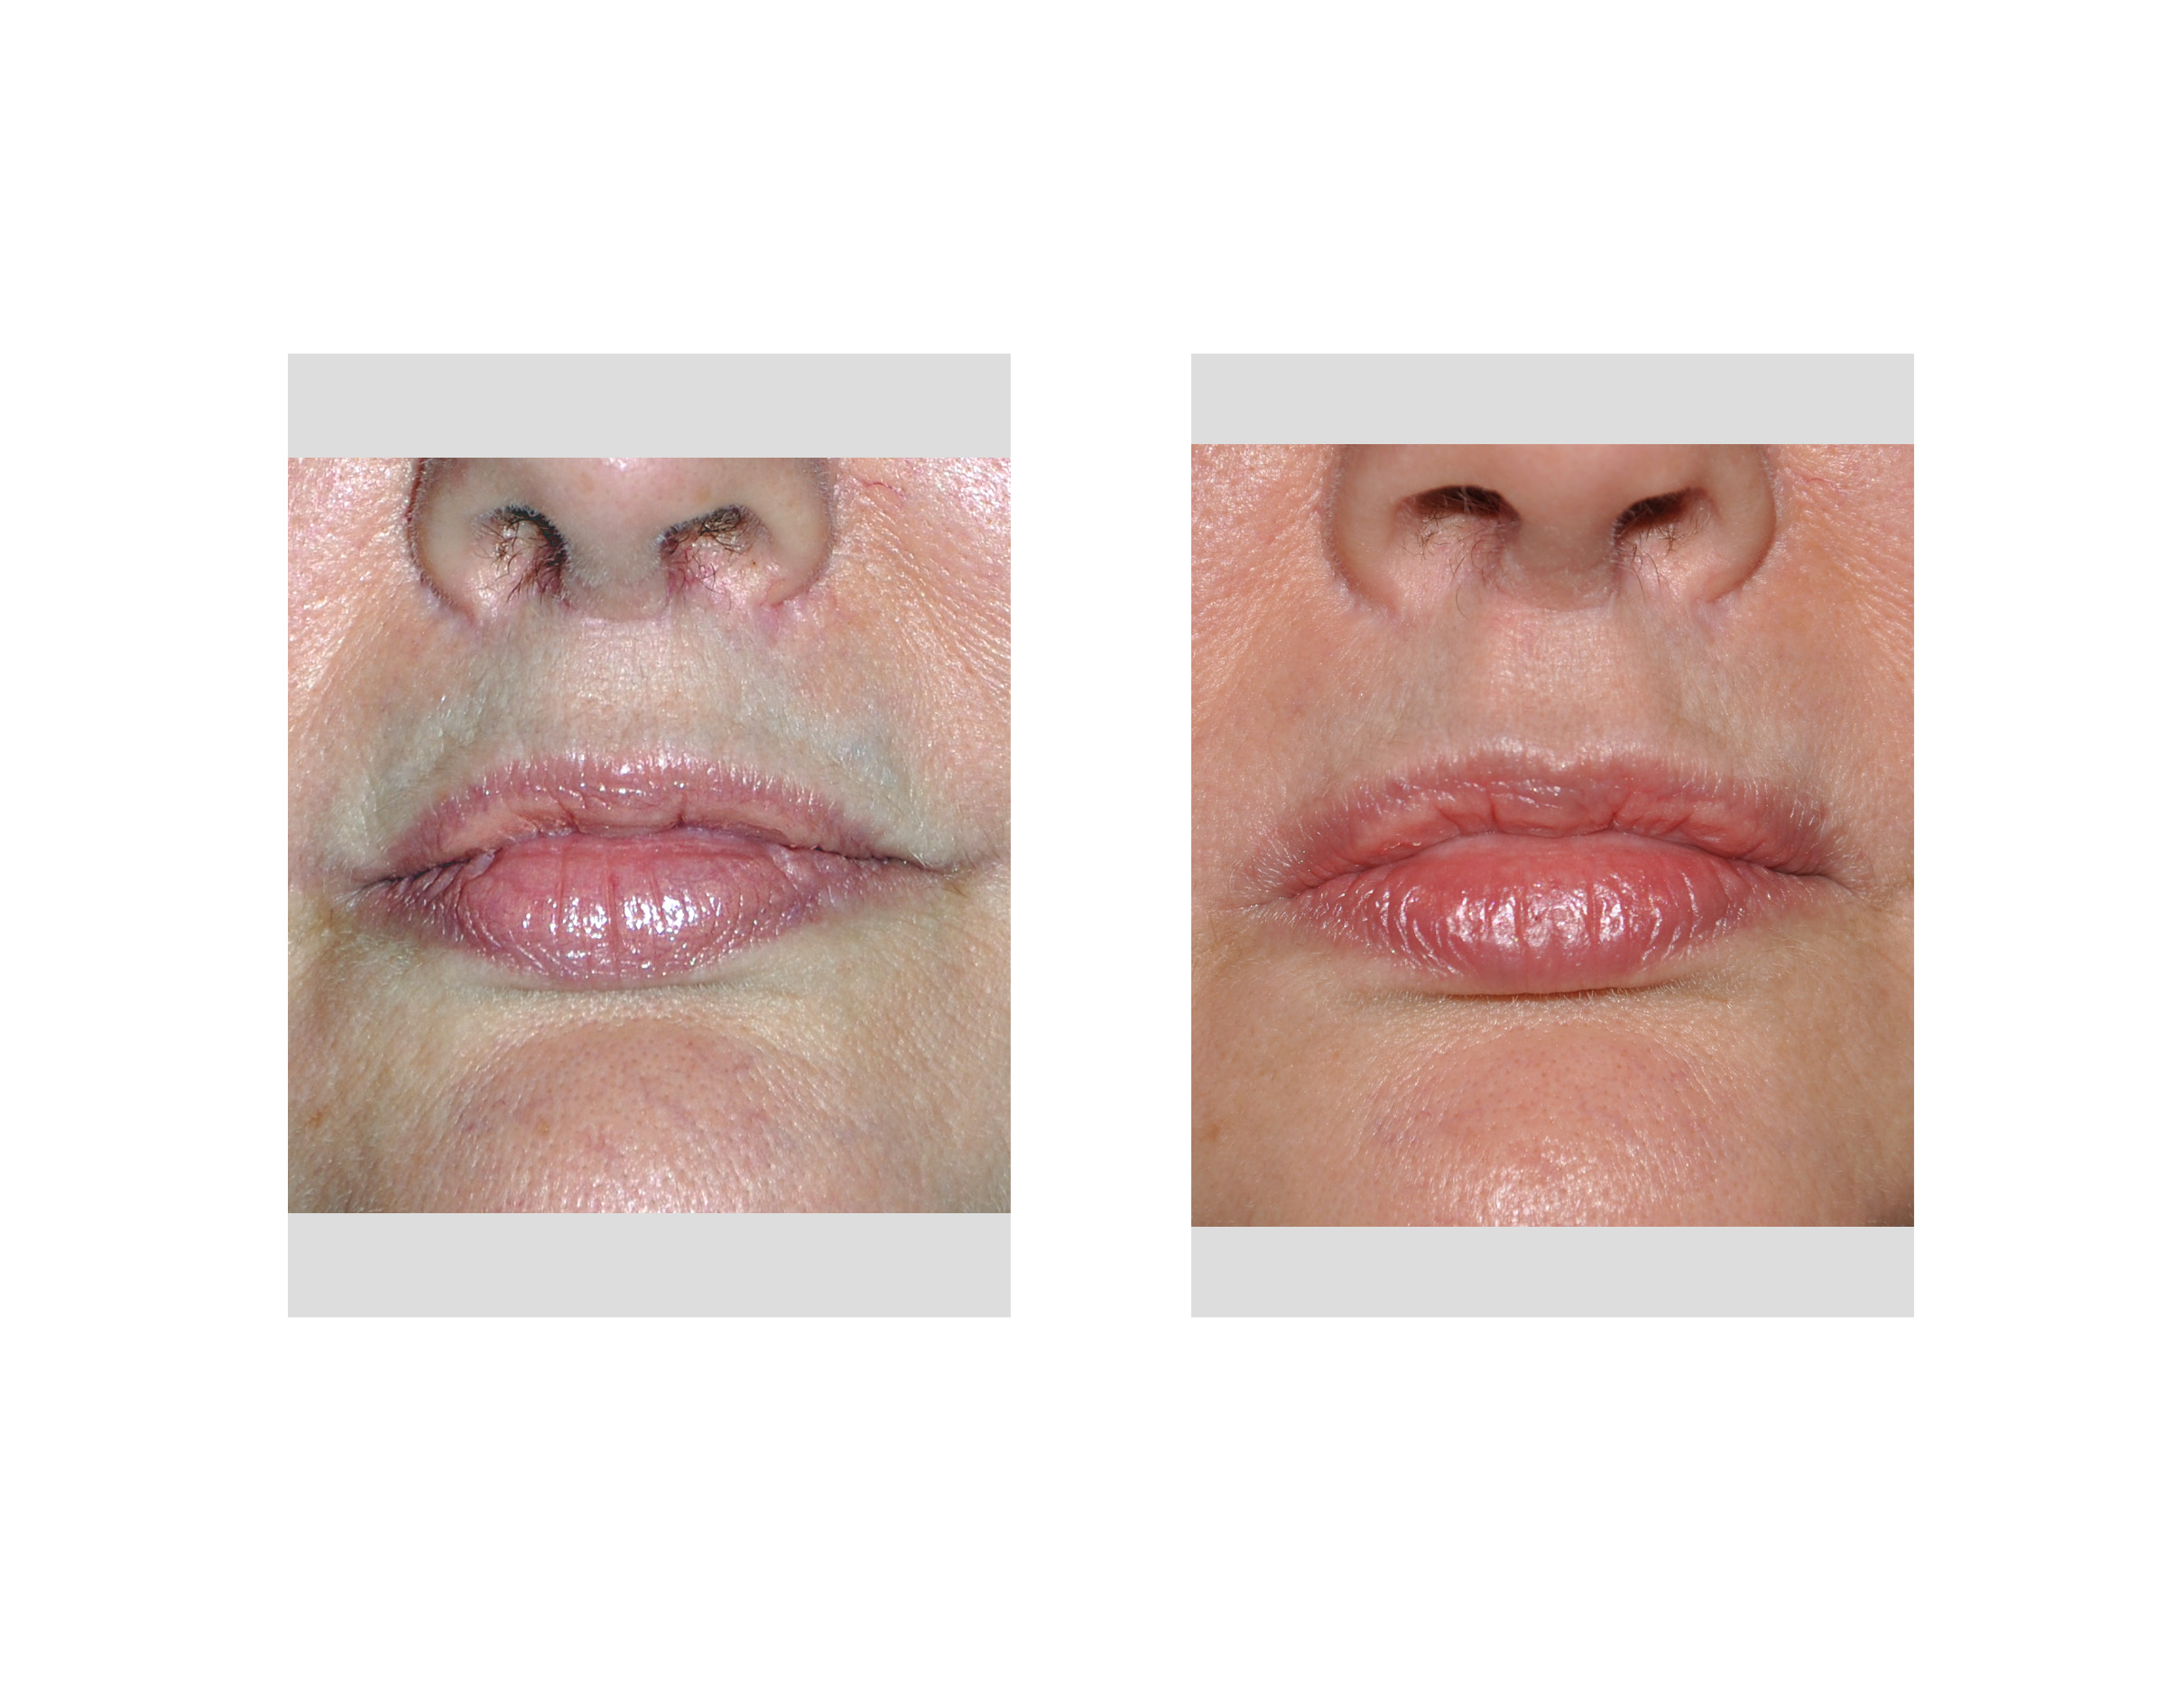 philtral-enhancement-upper-lip-front-view-dr-barry-eppley-indianapolis.jpg